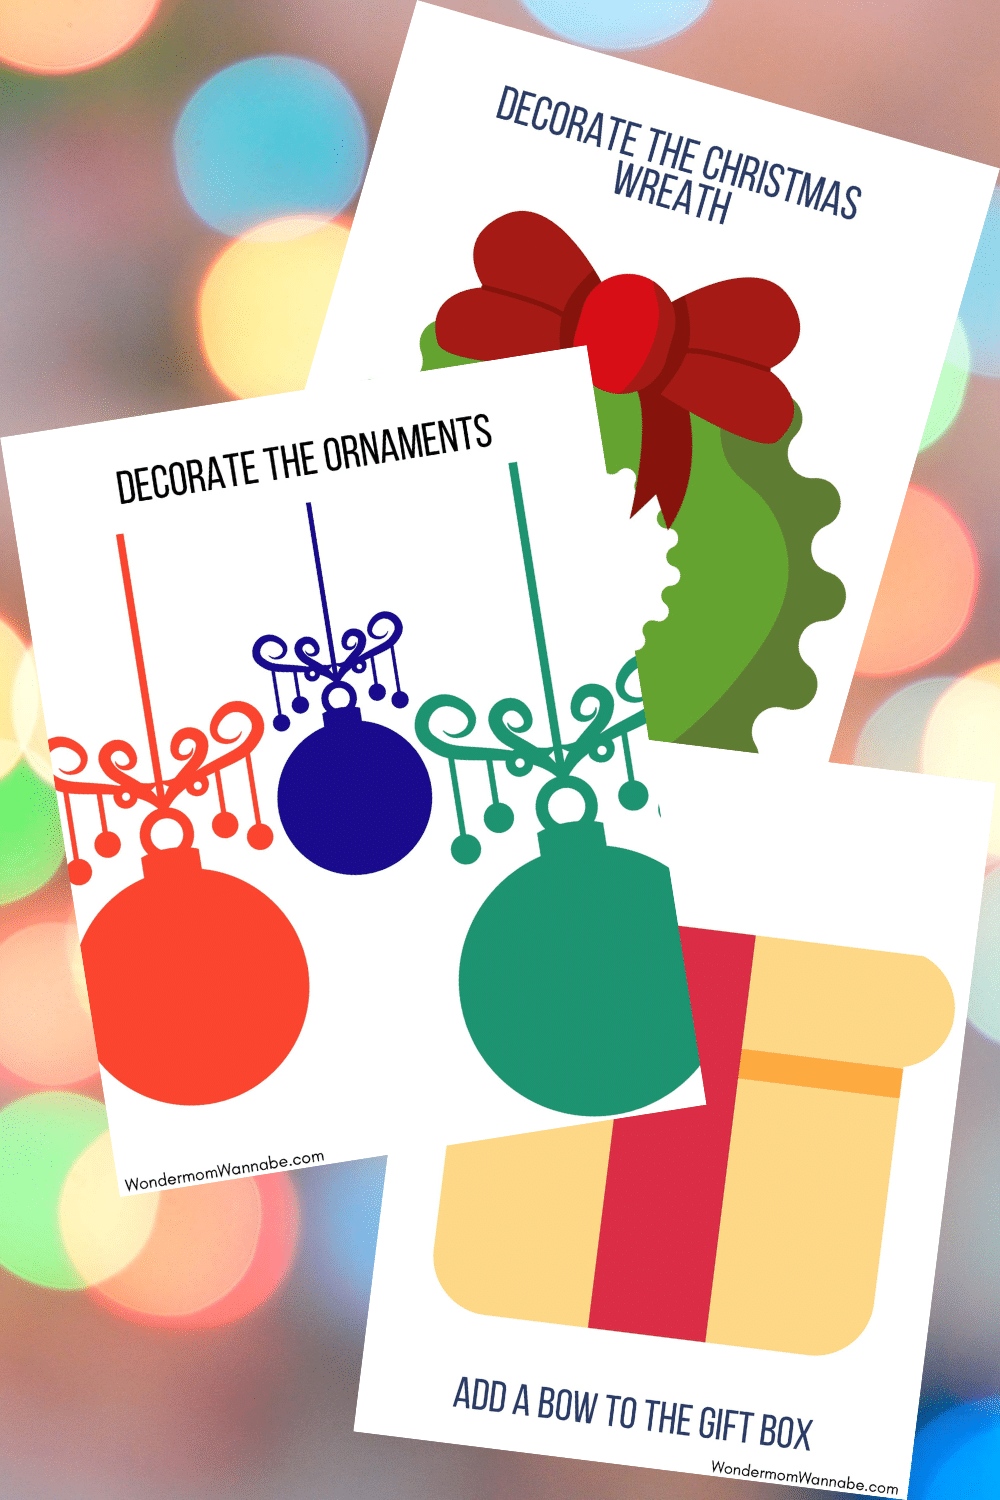 3 printable playdough mats titled decorate the ornaments, decorate the Christmas wreath and add a bow to the gift box, on a background with colored lights